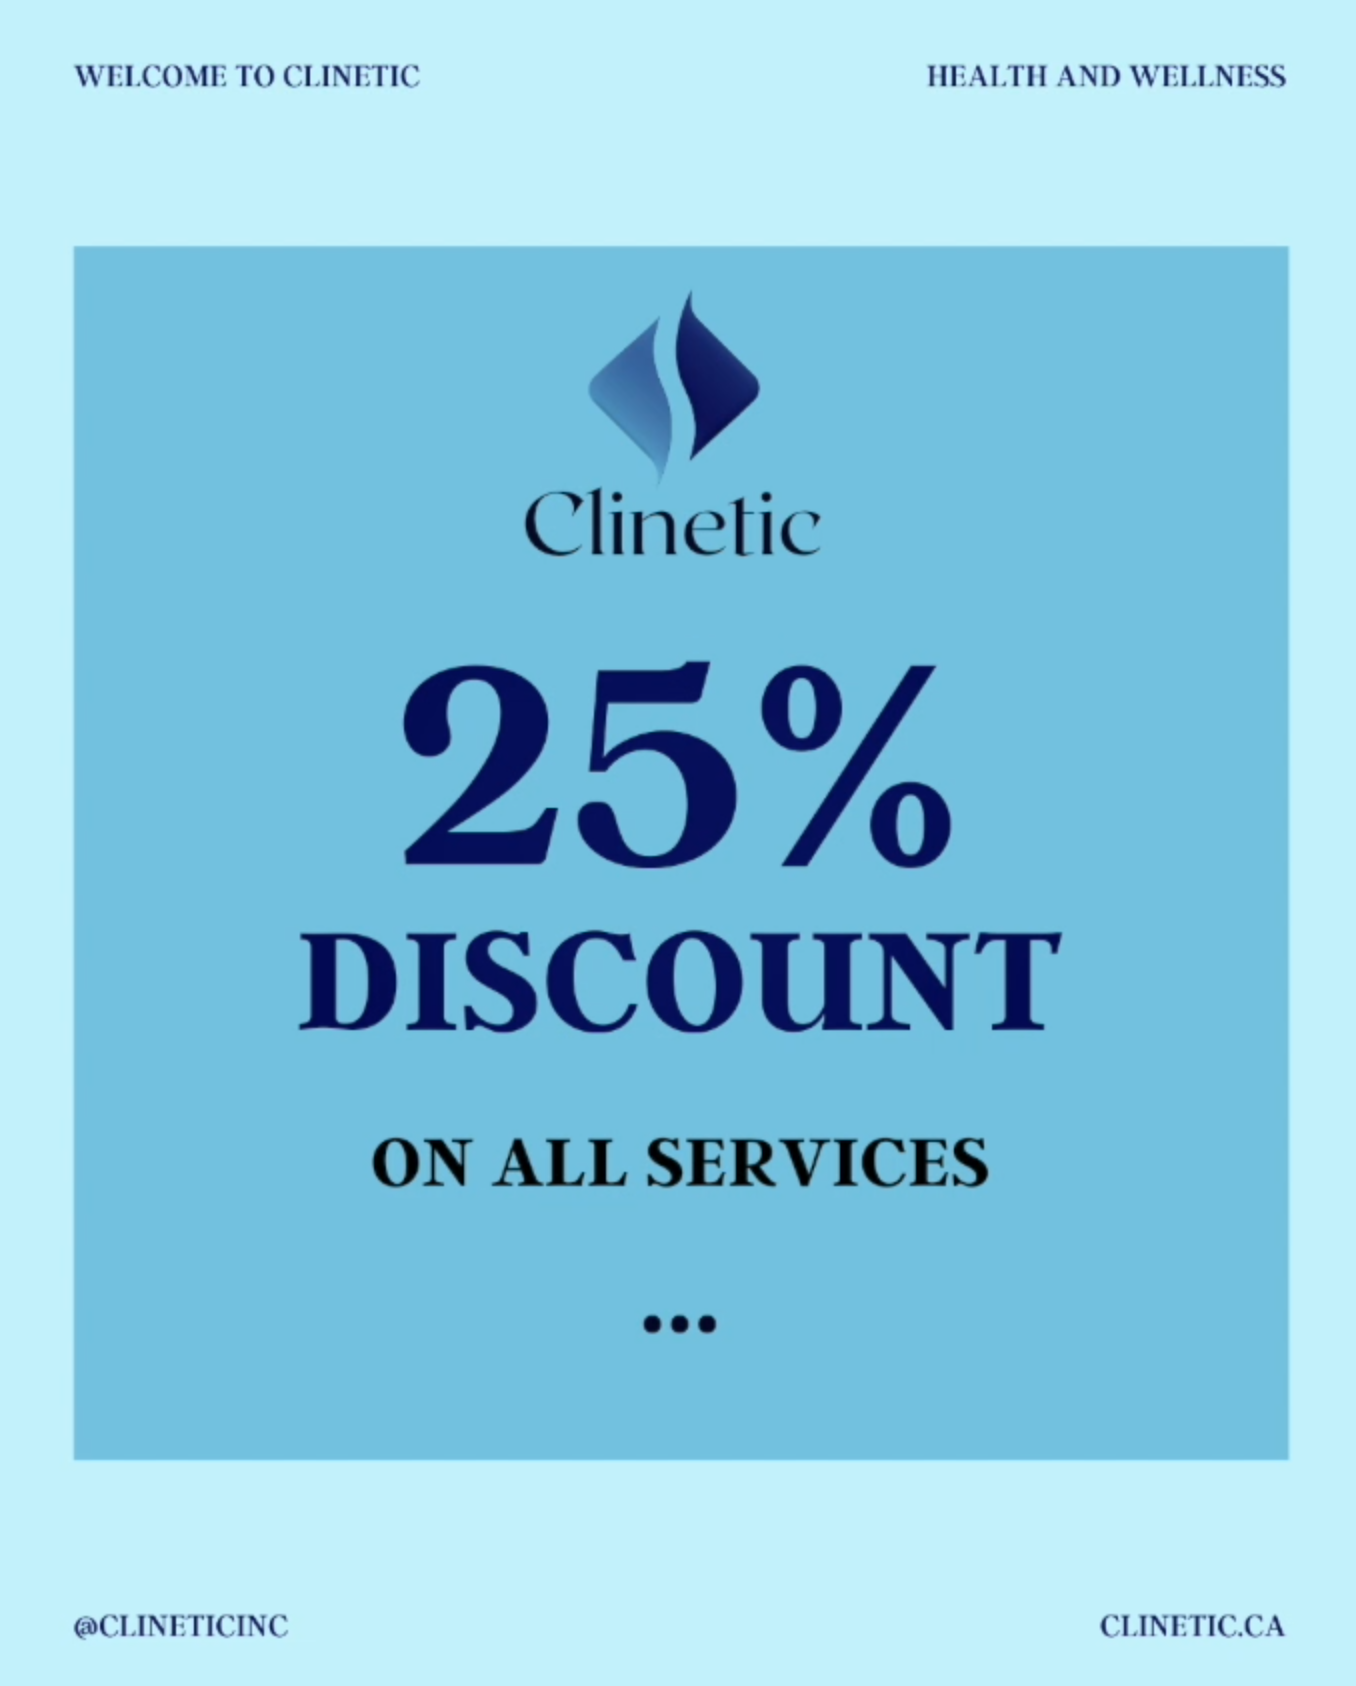 BOOK YOUR APPOINTMENT today and get a %25 discount on all services.